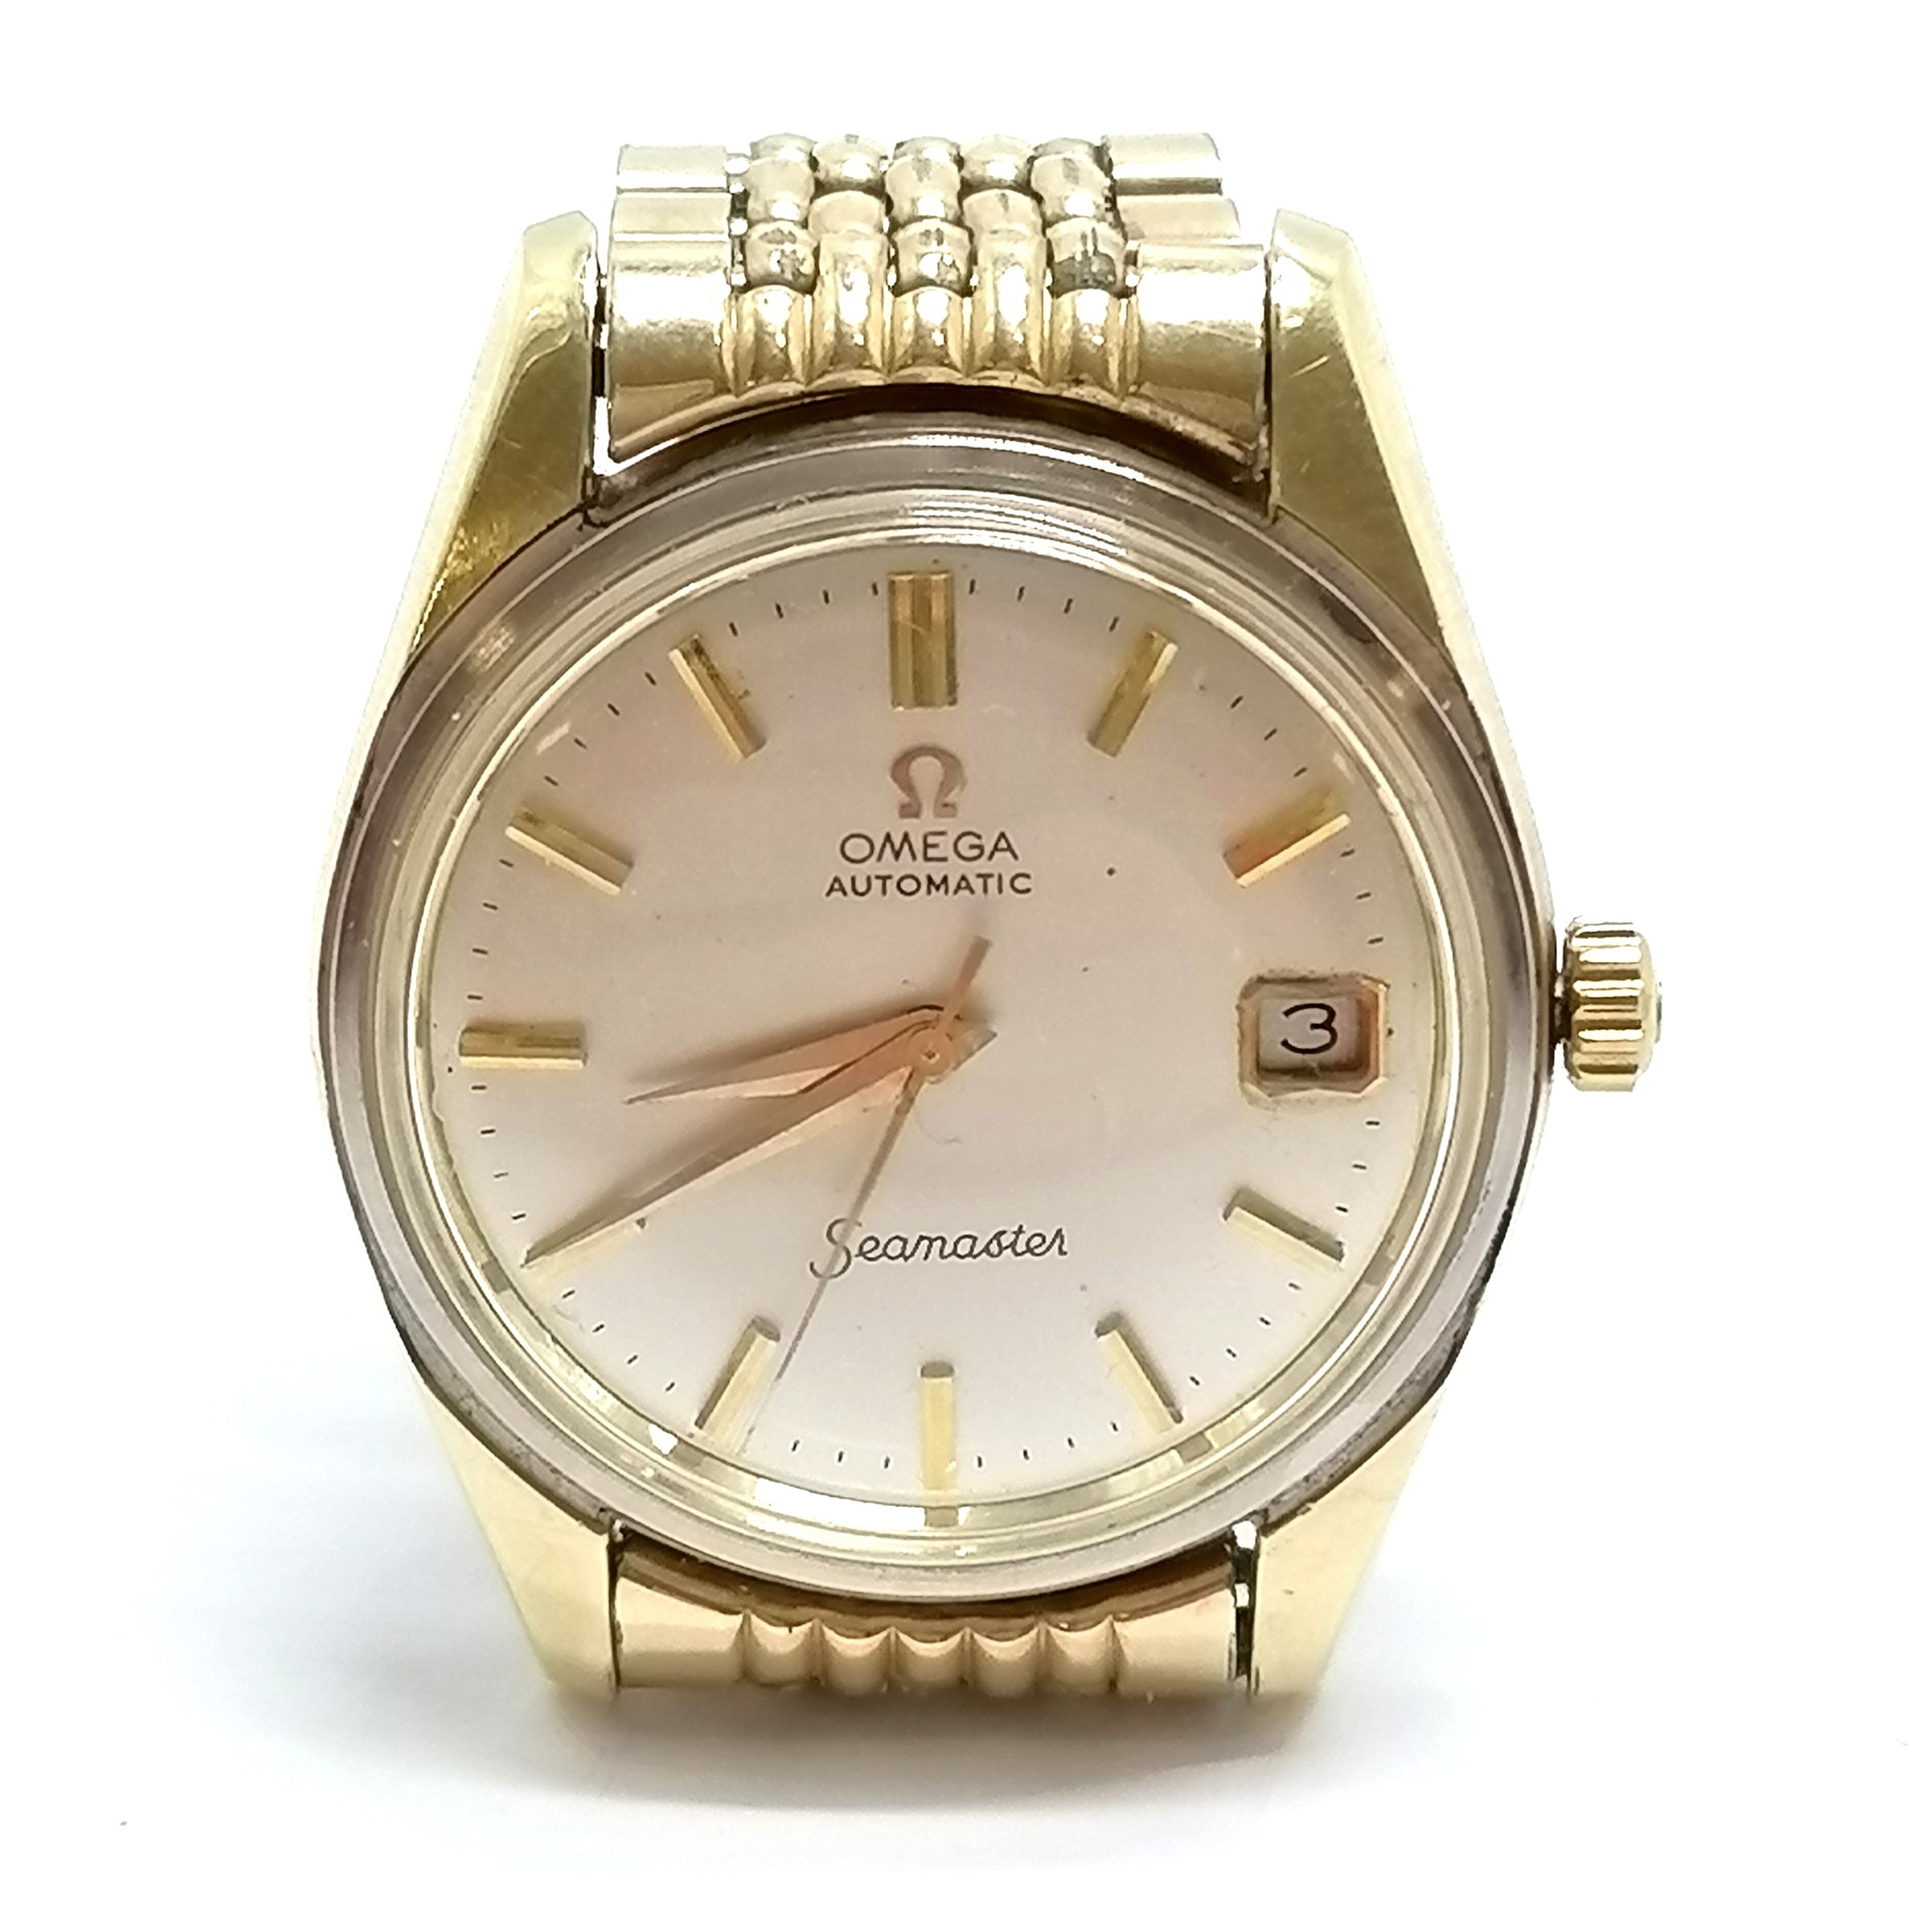 Omega automatic Seamaster gents wristwatch in 34mm case on original gold plated bracelet (has wear